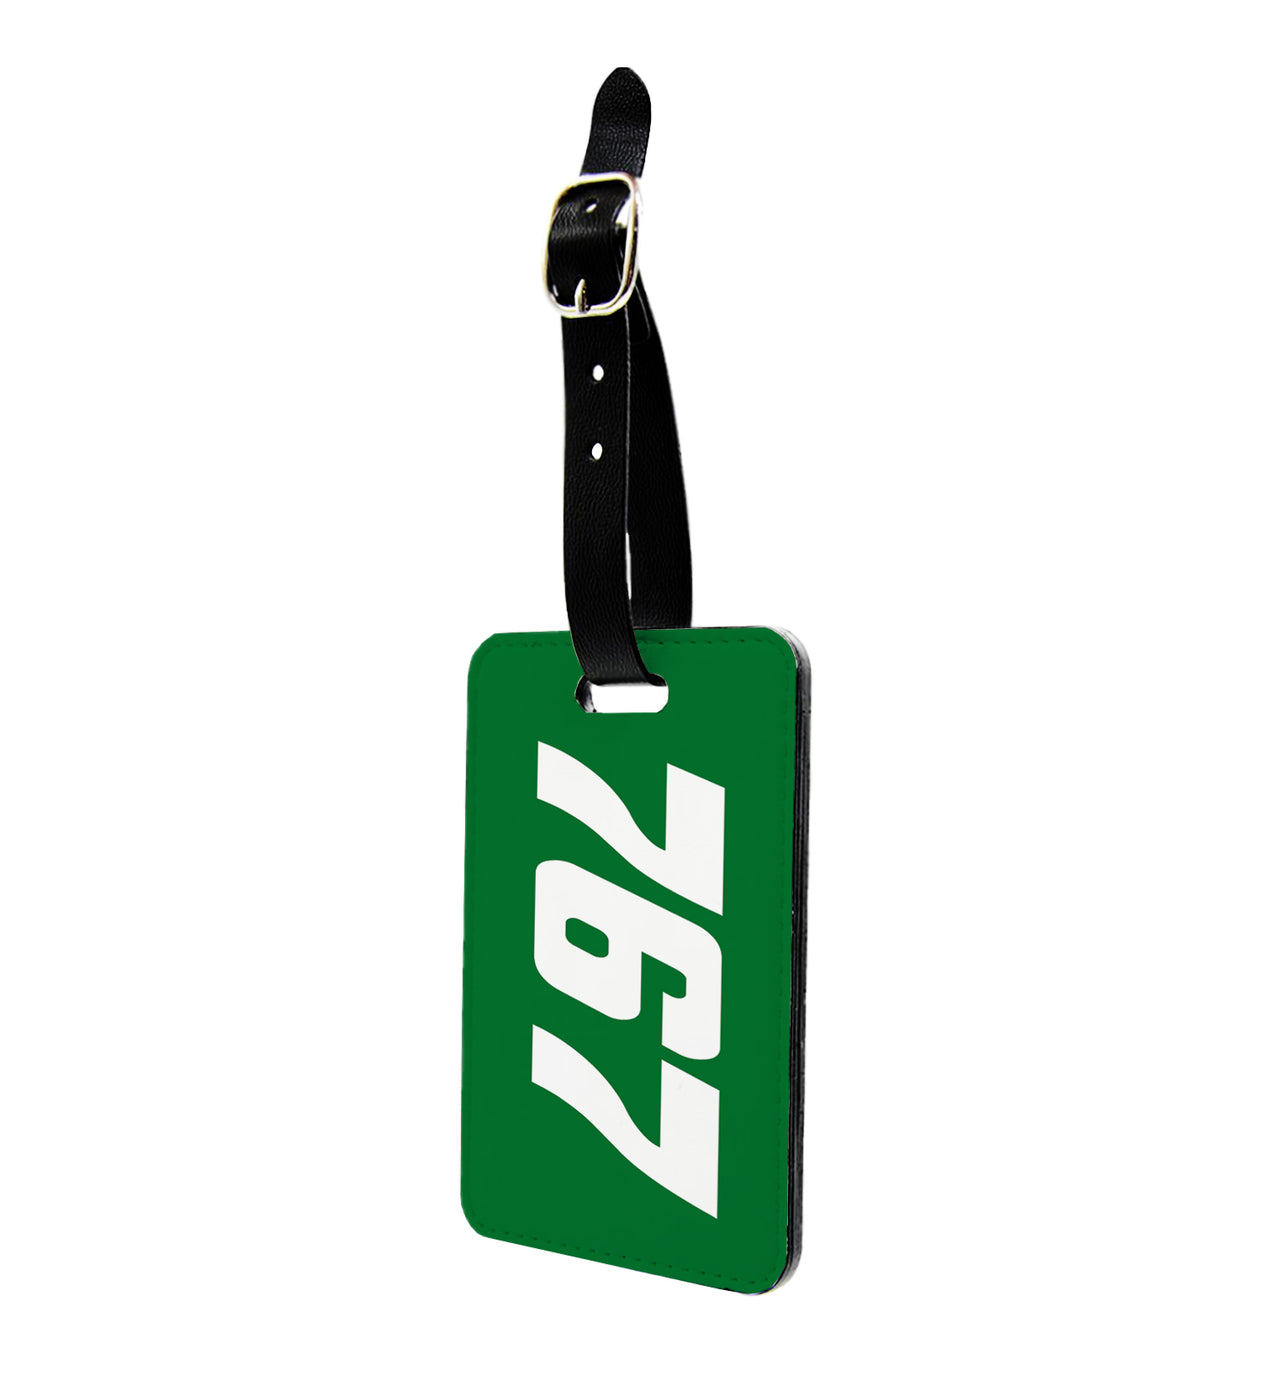 Boeing 767 Text Designed Luggage Tag